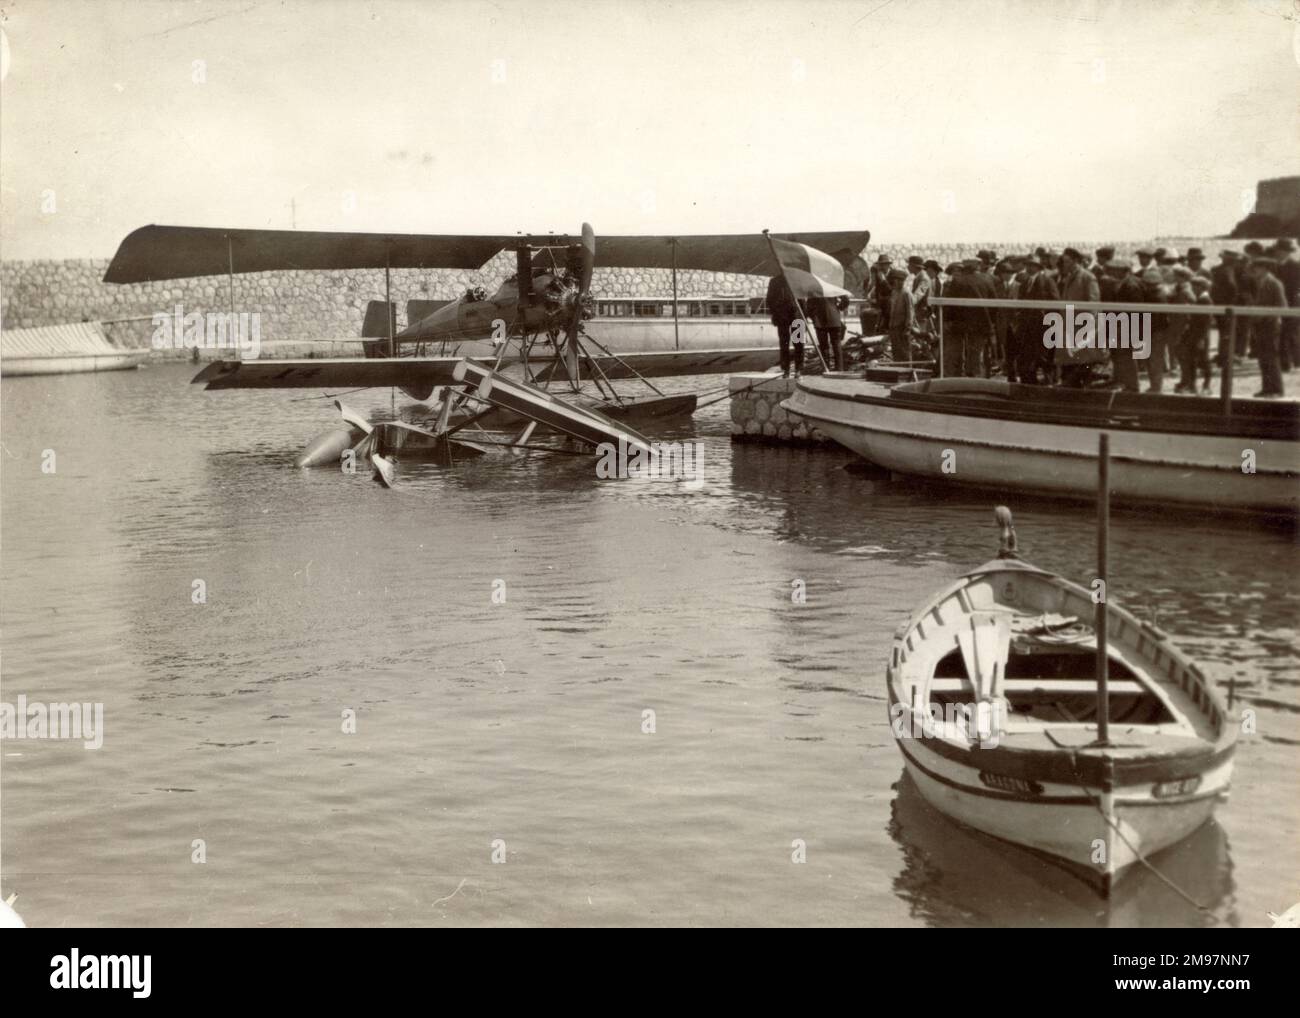 M. Bregi’s Breguet H1-U2 seaplane sheltering at Beaulieu. The wreck of M. Weymann’s Nieuport is in the foreground at the Monaco Schneider Trophy Contest, 12 April 1913. Stock Photo